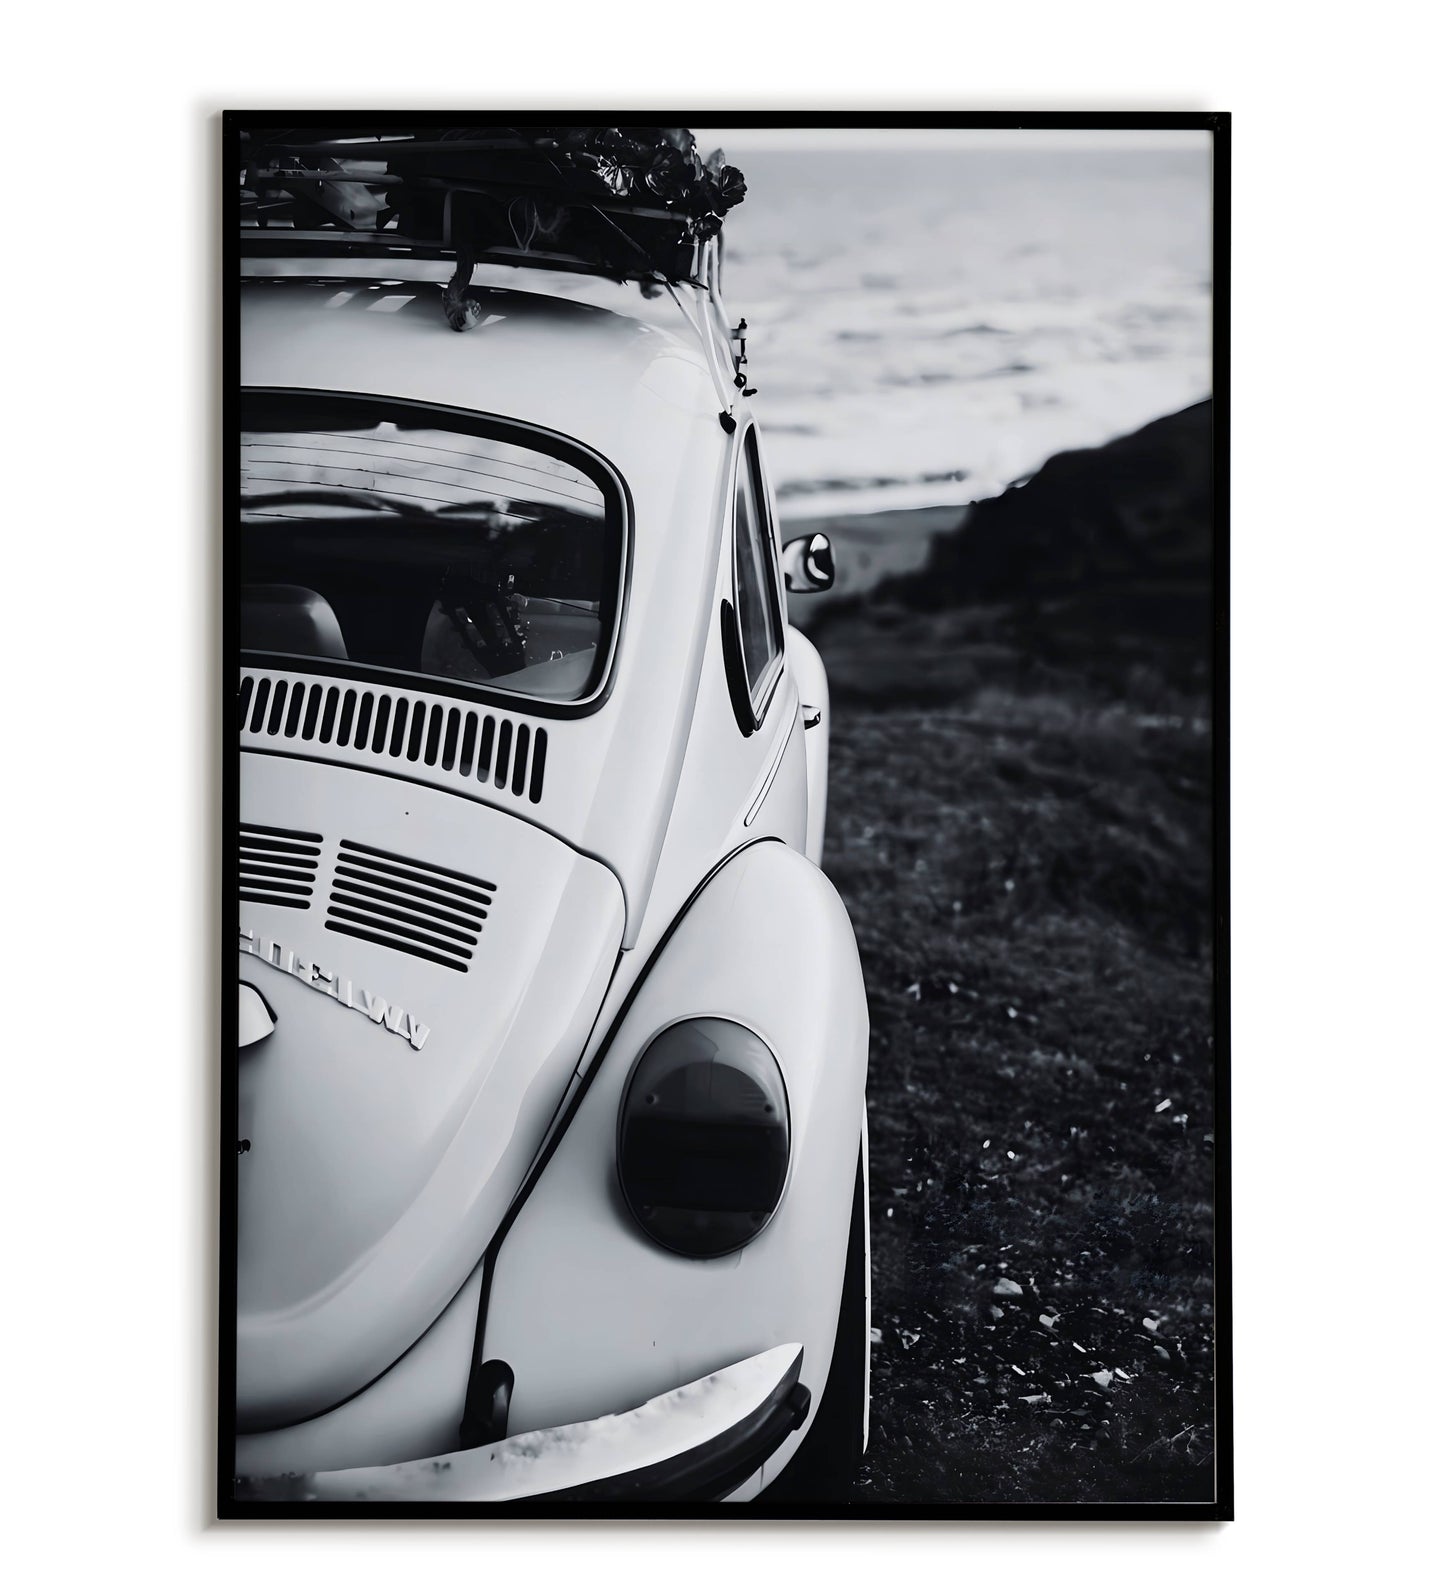 Car by the beach - Printable Wall Art / Poster. Download this evocative image to add a touch of nostalgia to your decor.